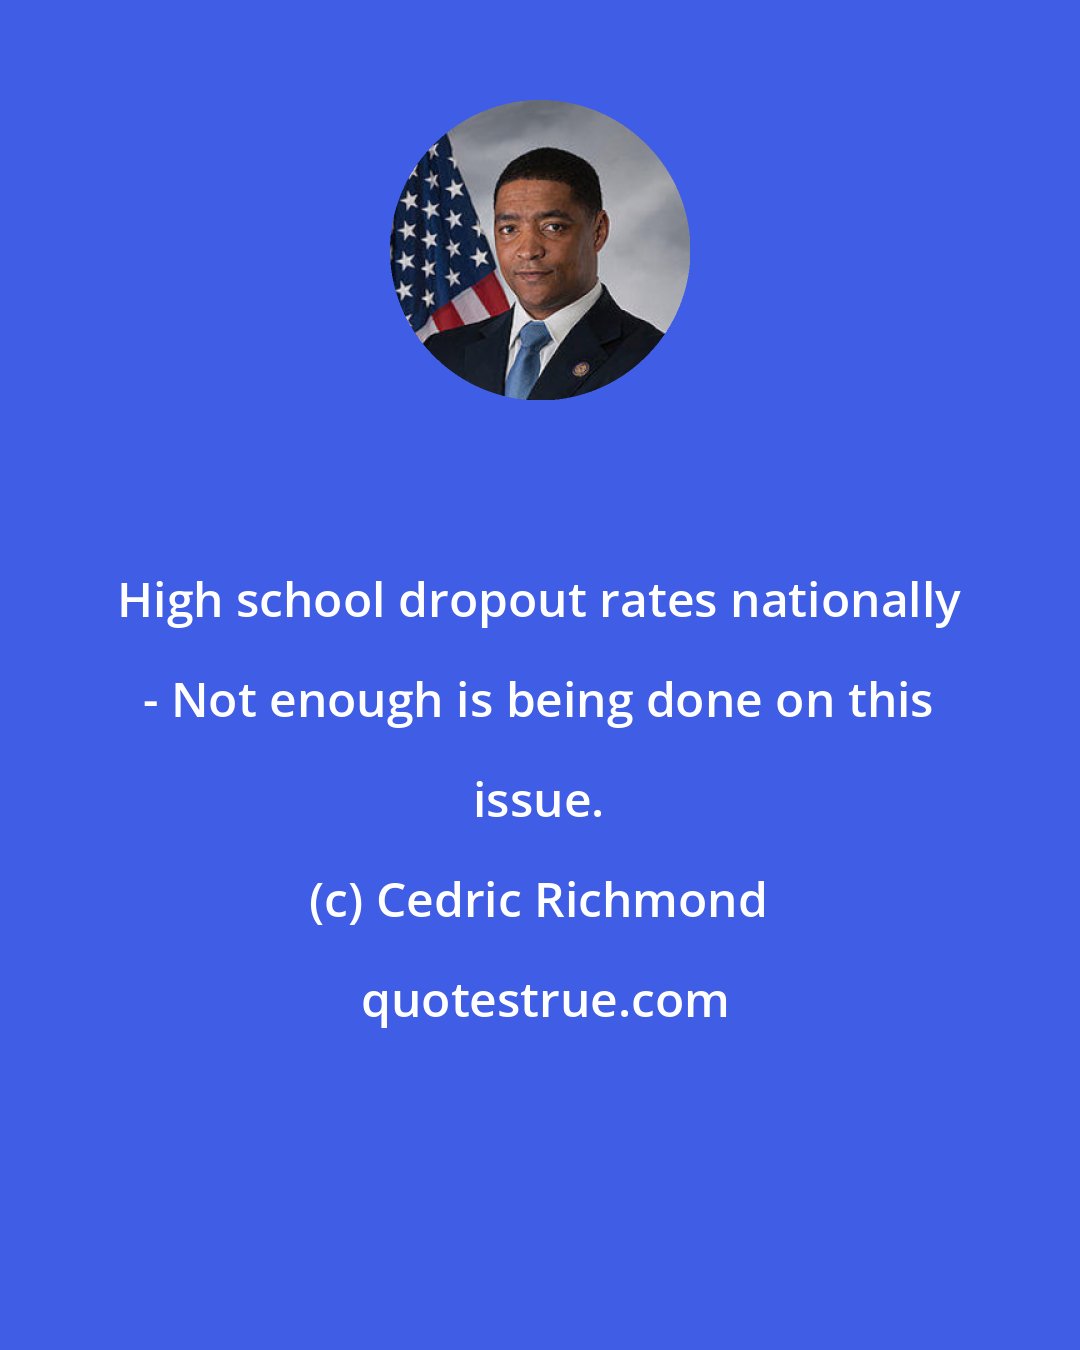 Cedric Richmond: High school dropout rates nationally - Not enough is being done on this issue.